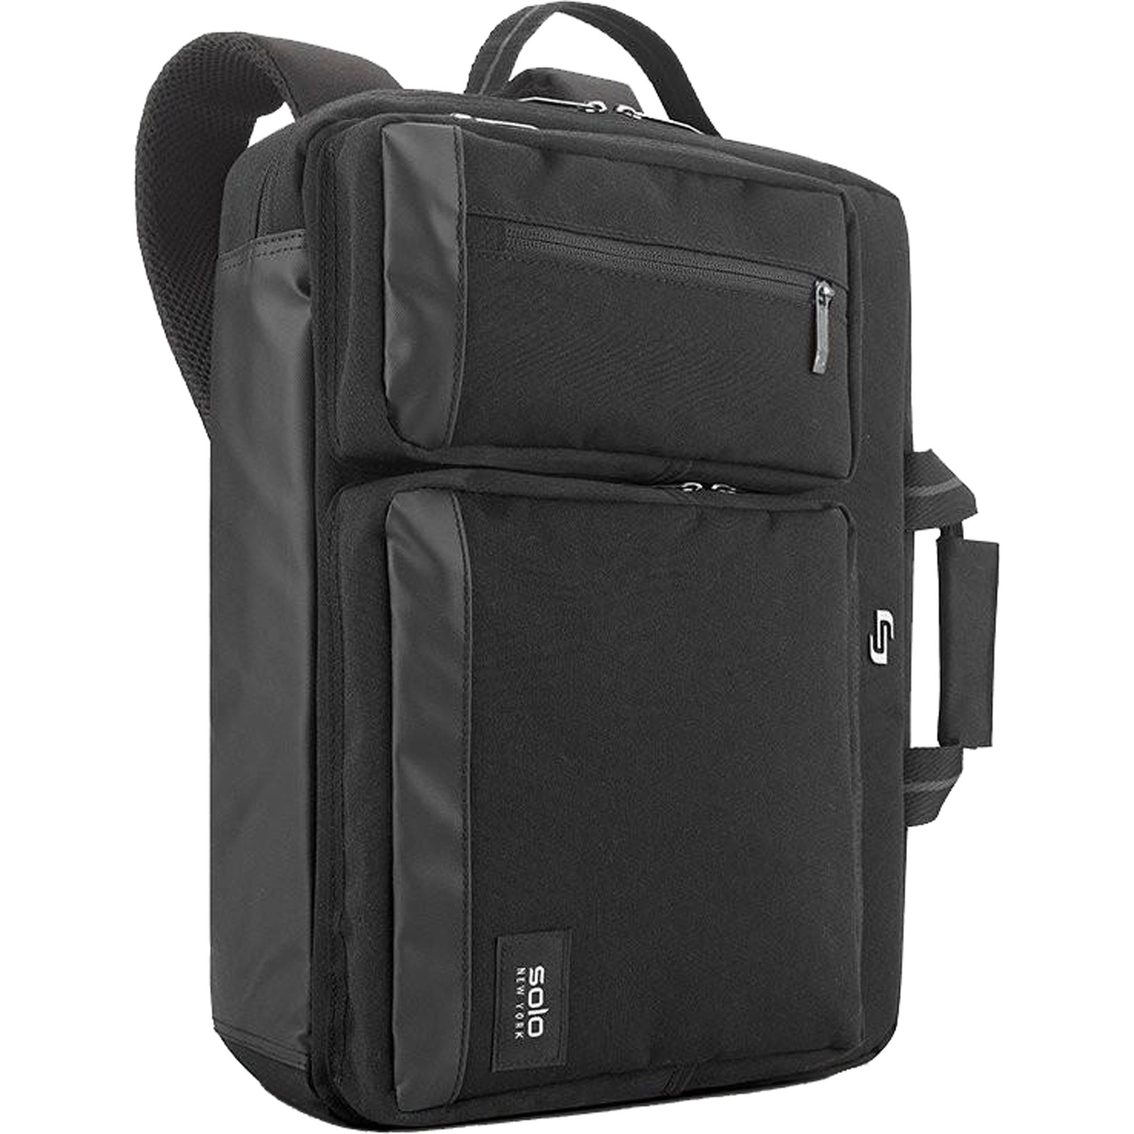 Solo Duane Hybrid 15.6 in. Briefcase - Image 5 of 6